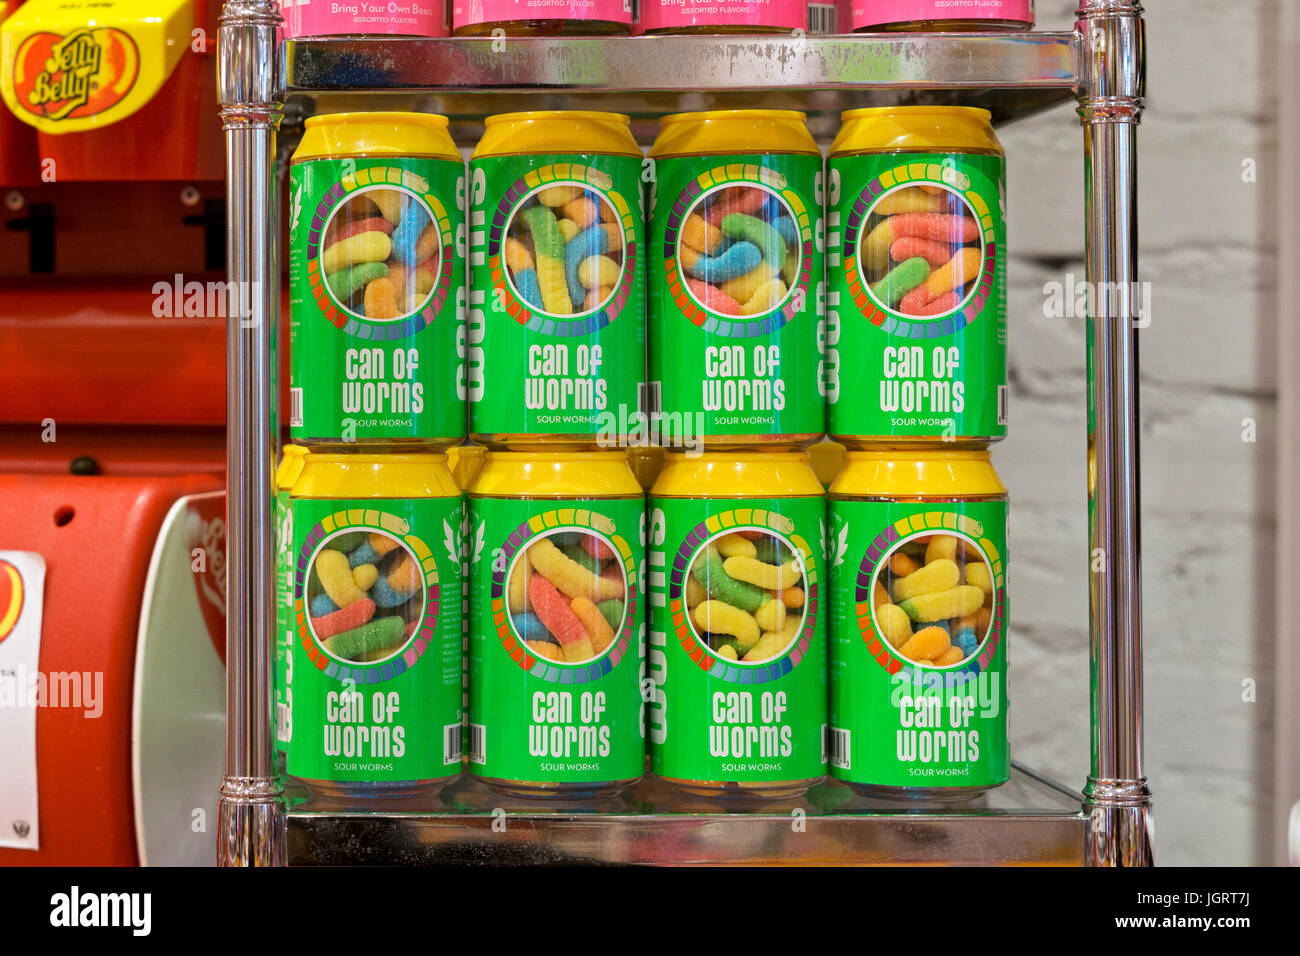 CAN OF WORMS. Several cans of worms for sale at It'sugar on Briadway in lower Manhattan, New York City Stock Photo